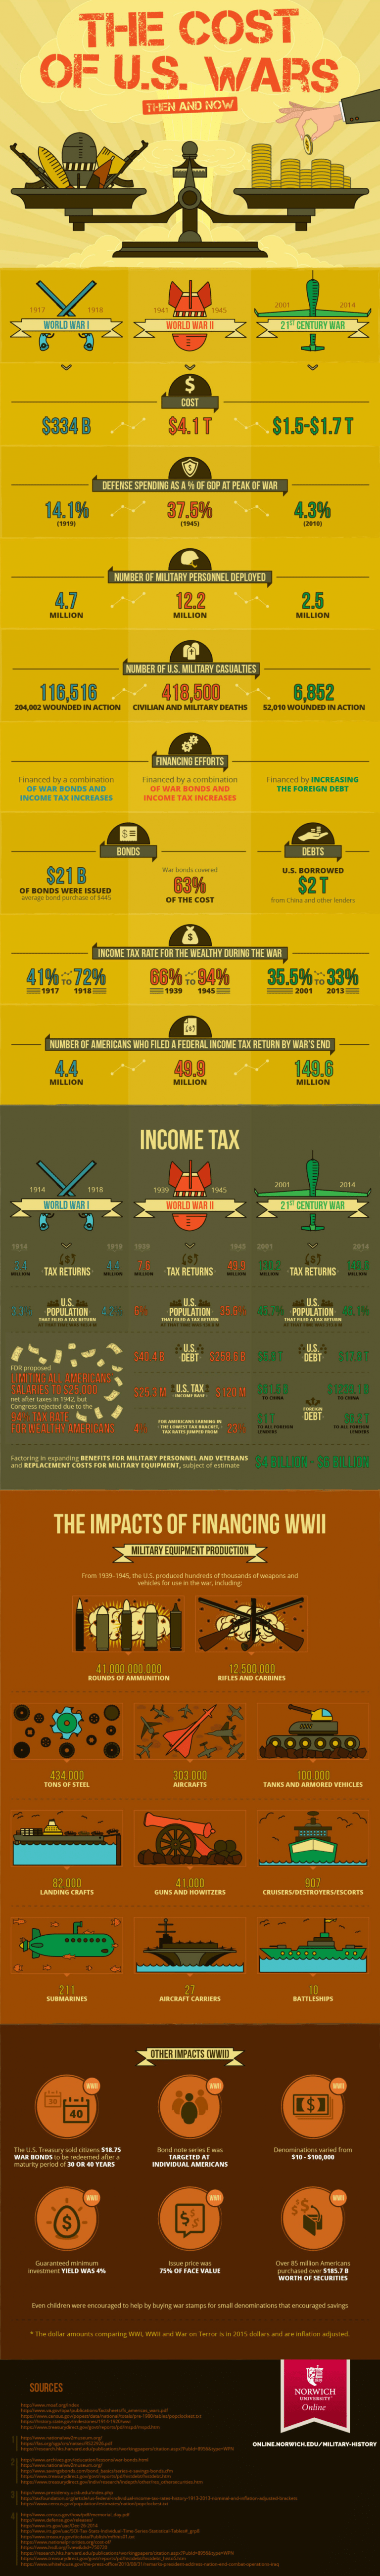 infographic - the cost of US wars